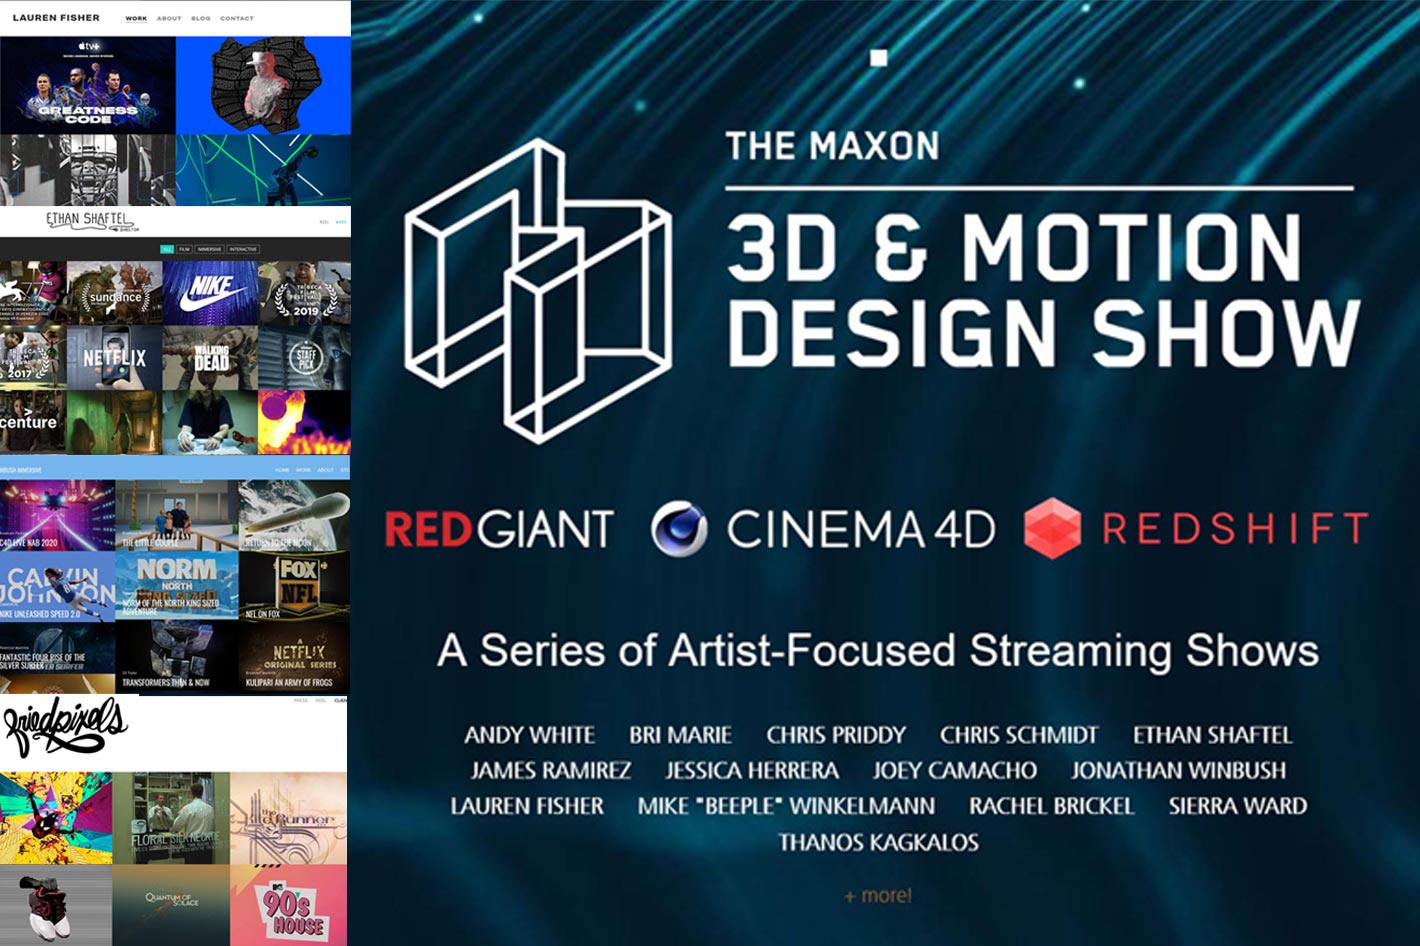 Maxon: here is the October 3D Motion & Design Show lineup